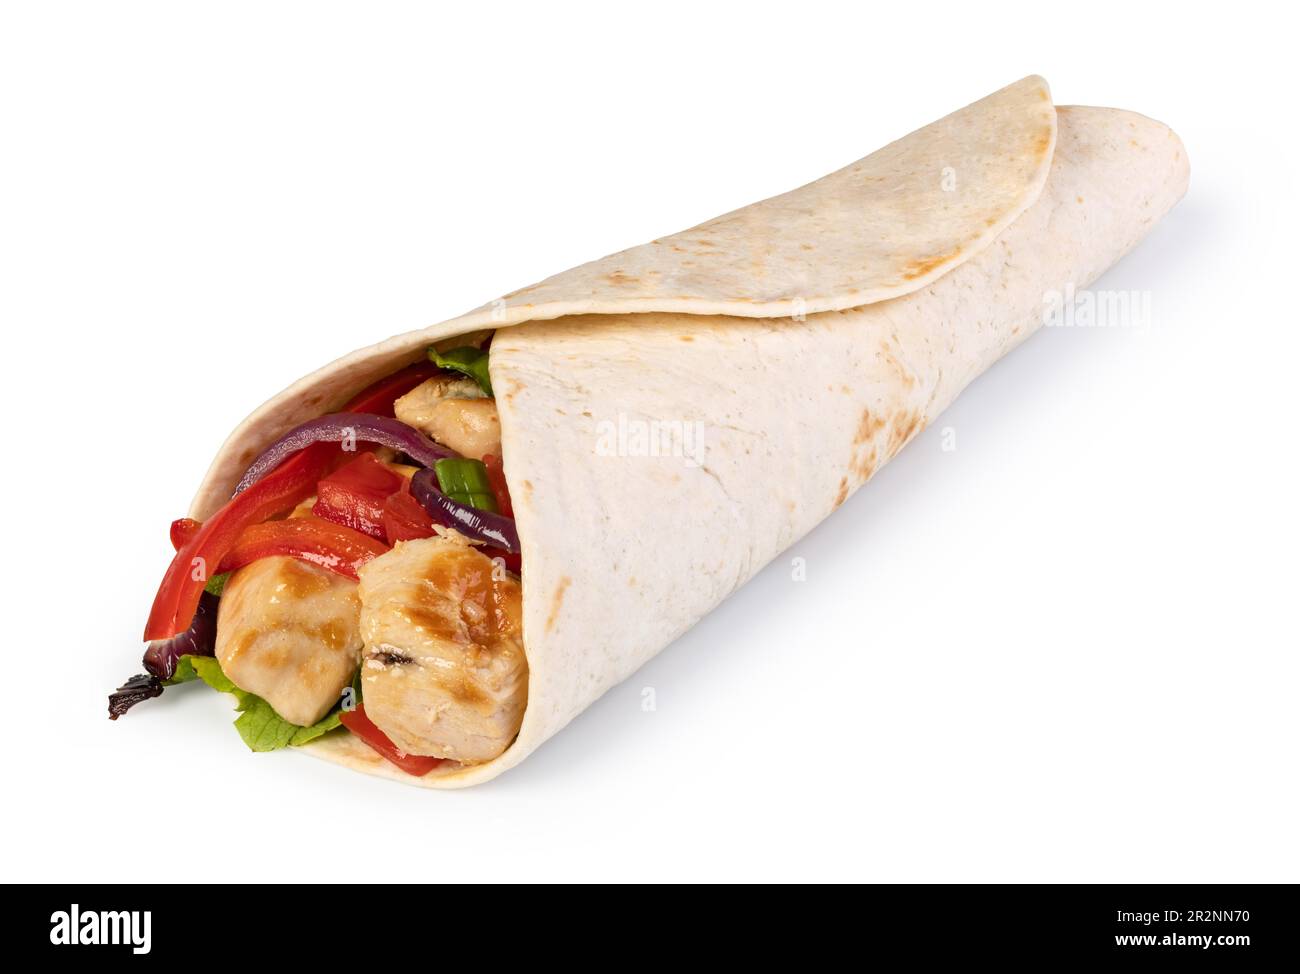 burrito with vegetables and tortilla, isolated on white Stock Photo